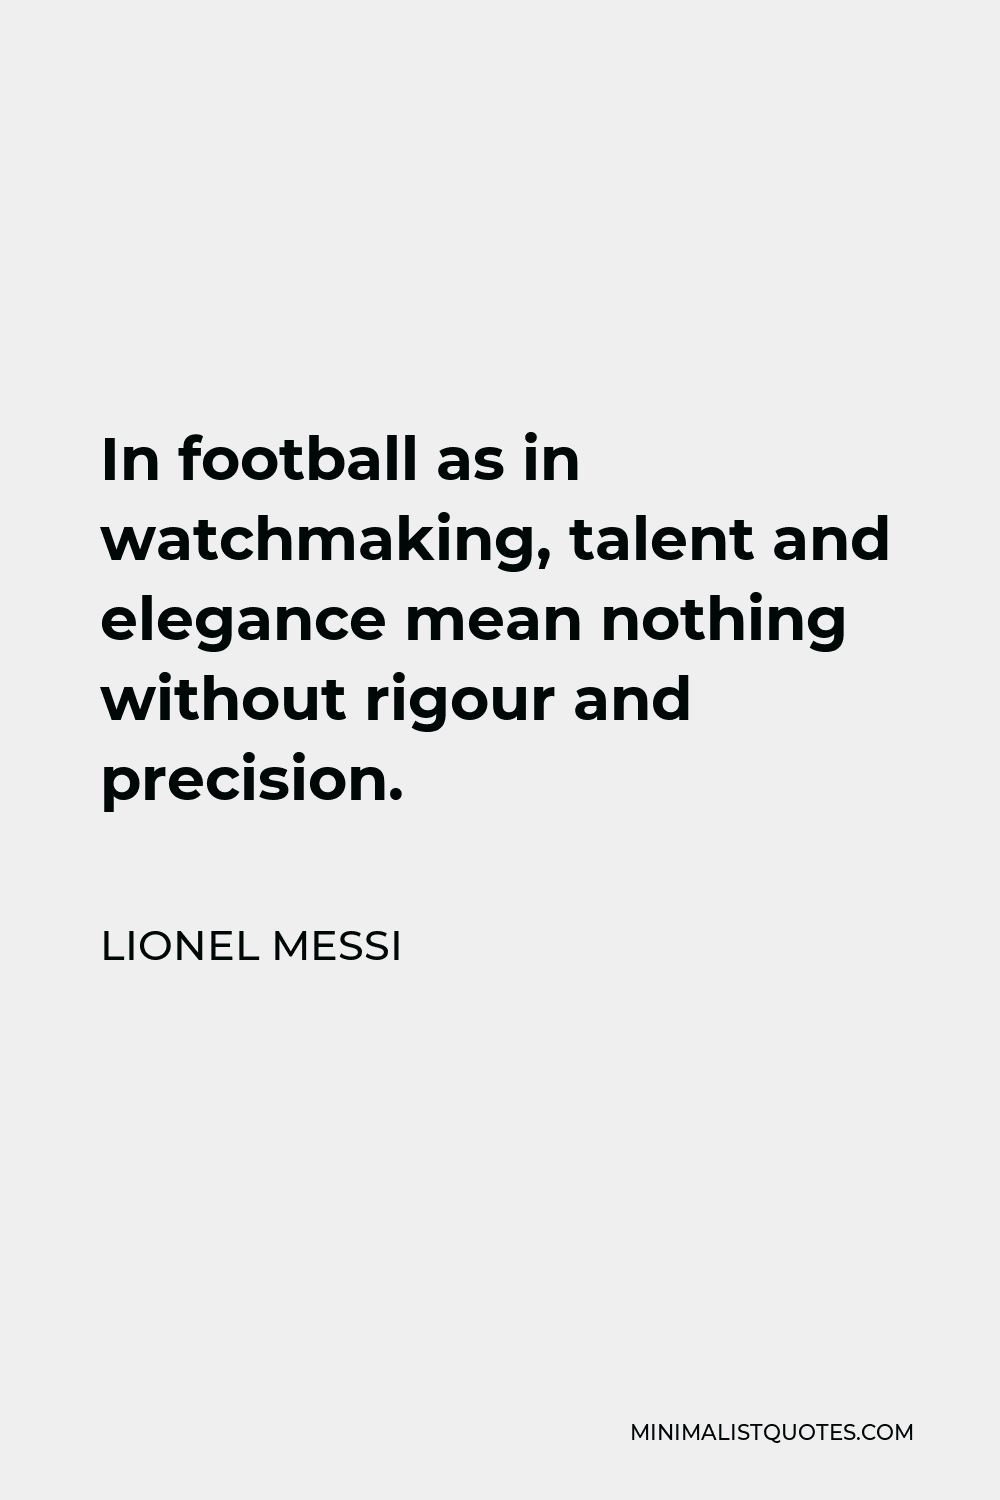 Lionel Messi Quote - In football as in watchmaking, talent and elegance mean nothing without rigour and precision.